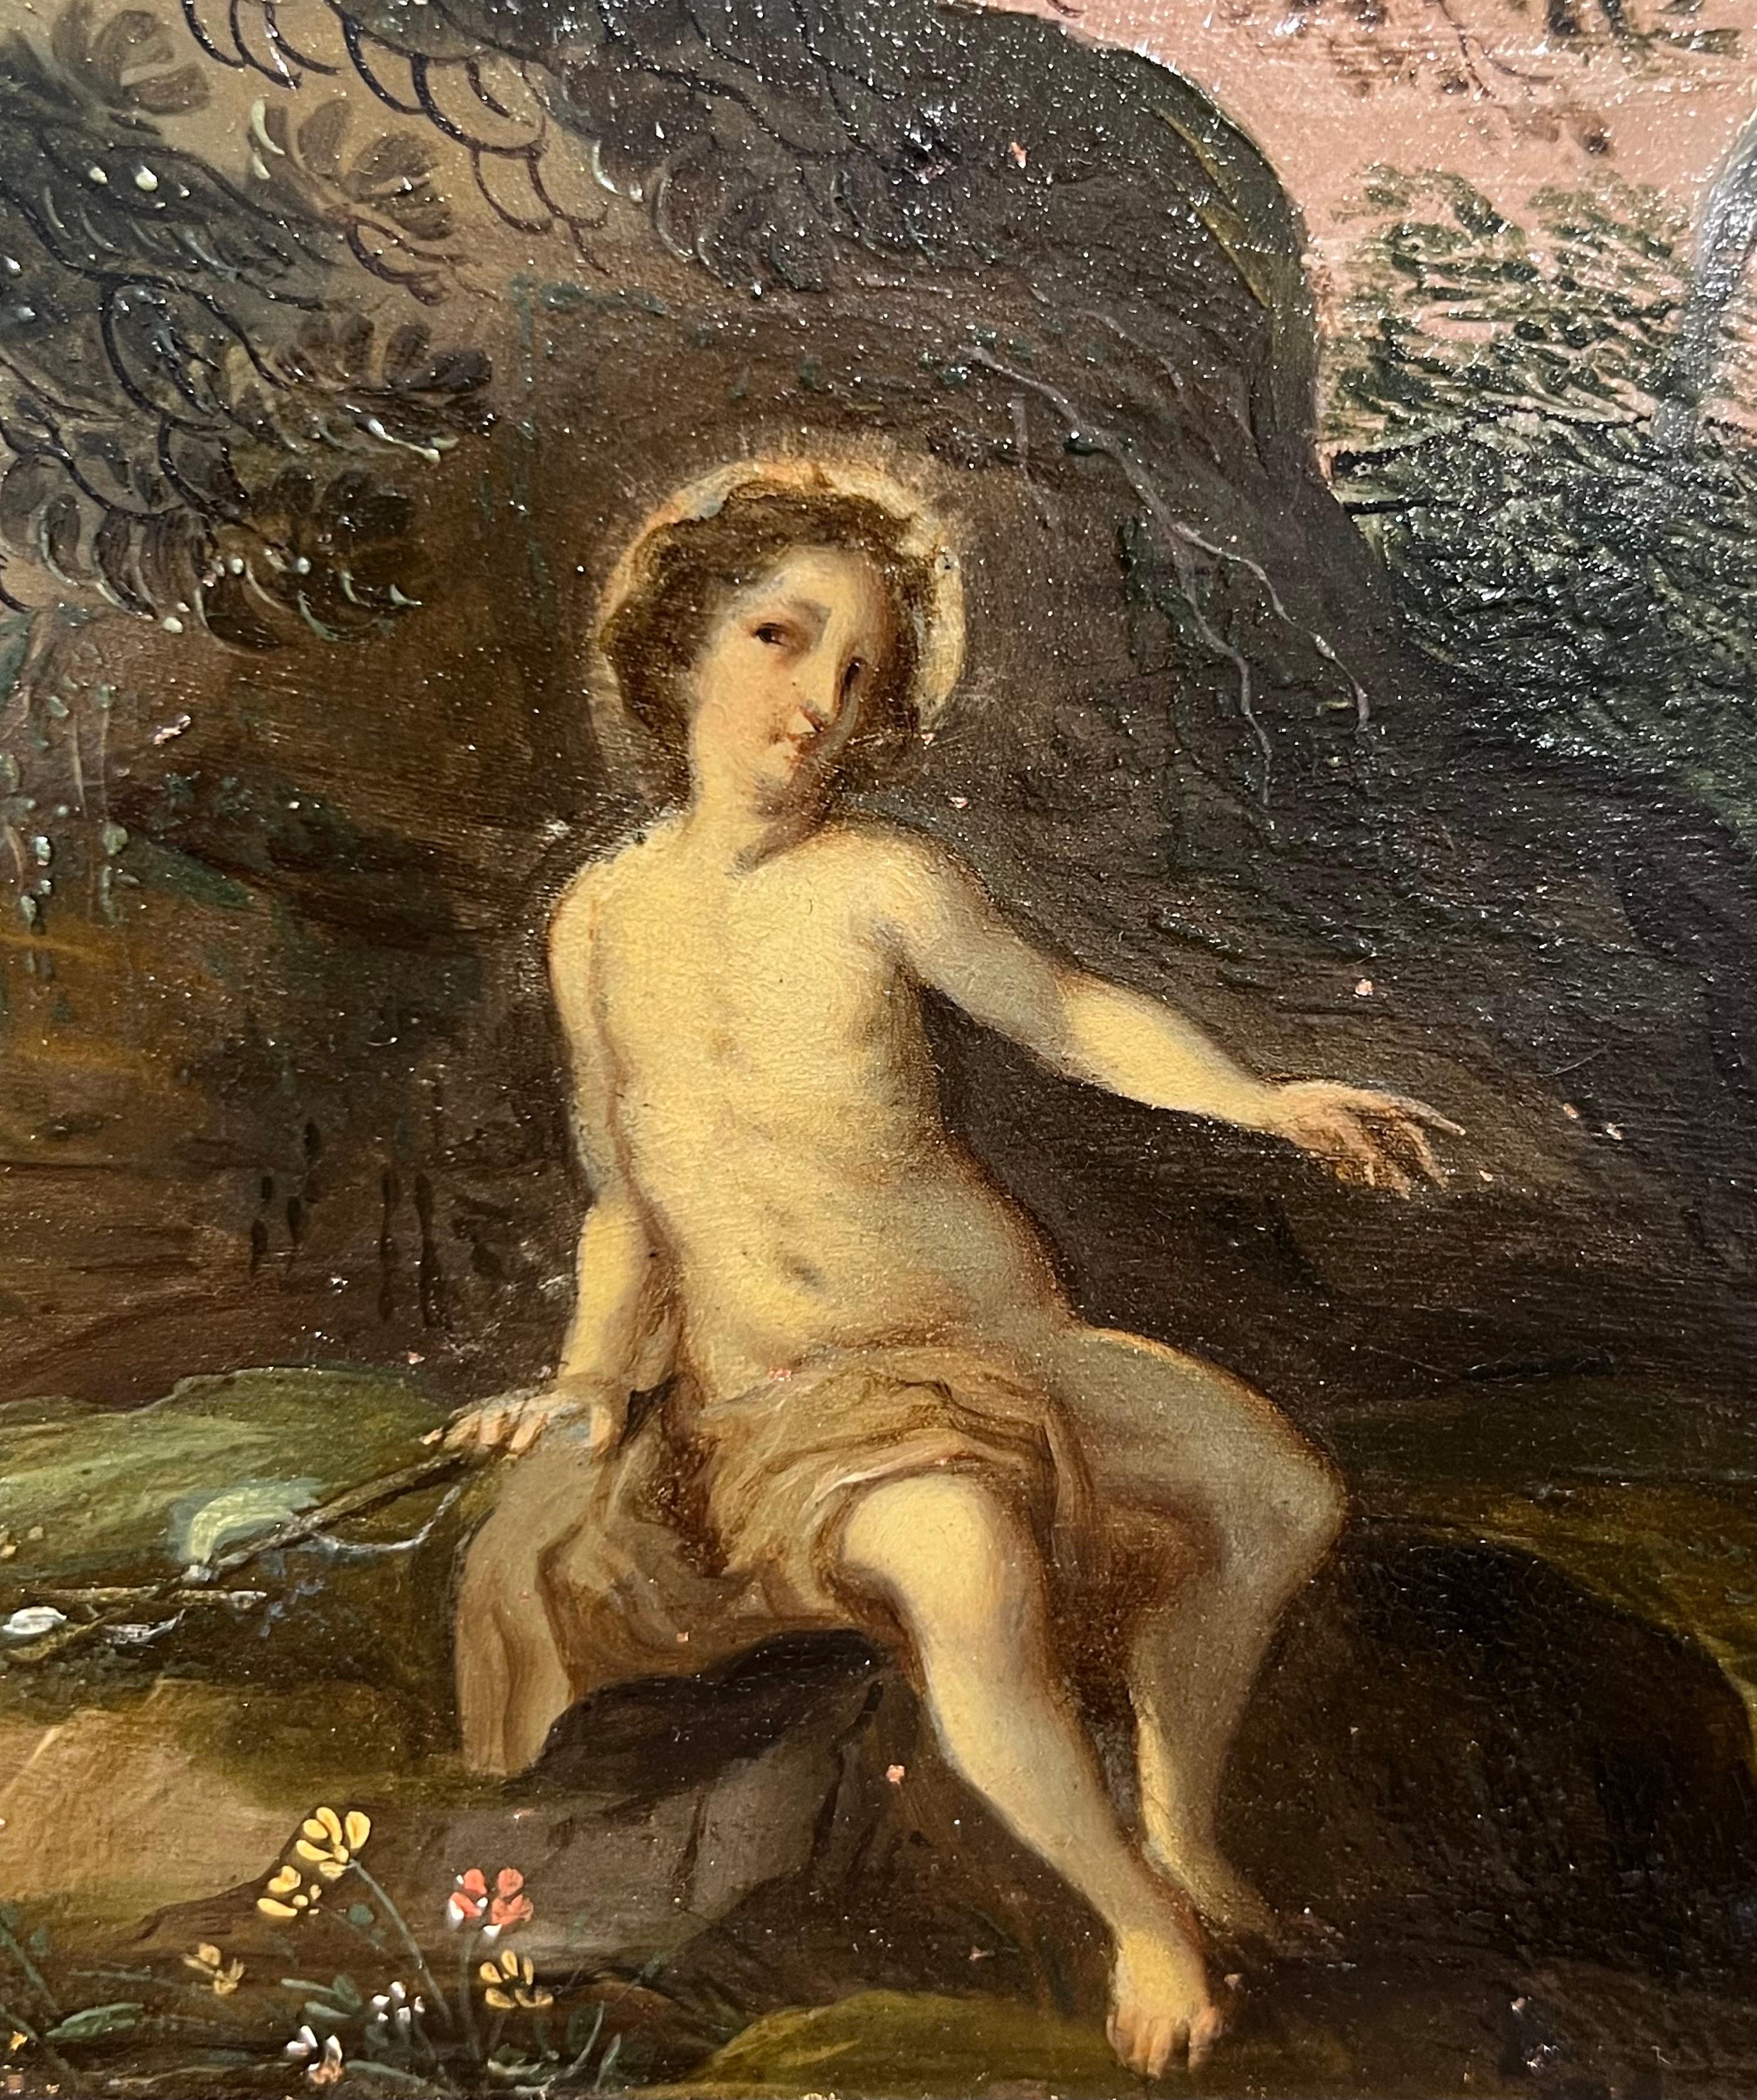 17th century oil on copper - St. John the Baptist in a landscape with the Lamb

The very finely and delicately painting depicts St. John in a vast landscape, with a vibrant sunset colouring the sky in pink and golden hues, further highlighting the